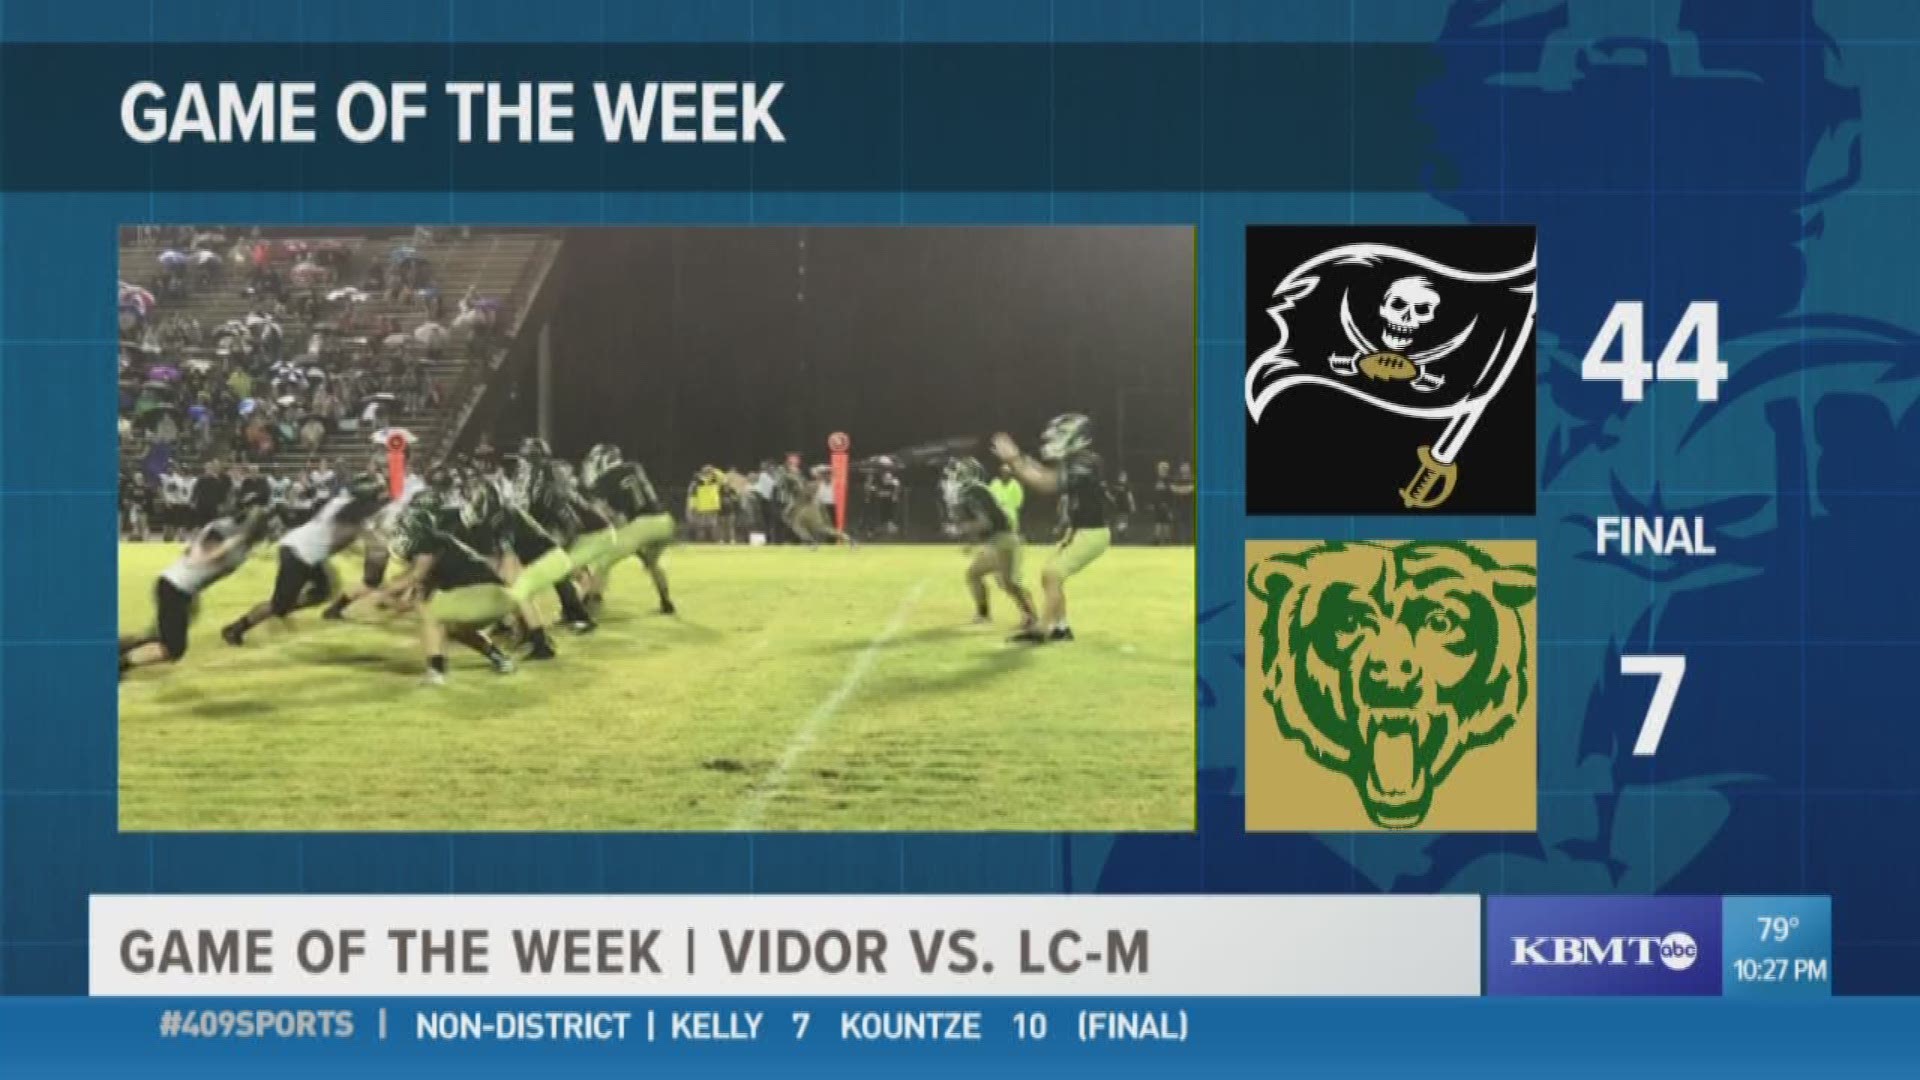 WEEK 4: Vidor HS beats LC-M 44 - 7 in the #409Sports game of the week